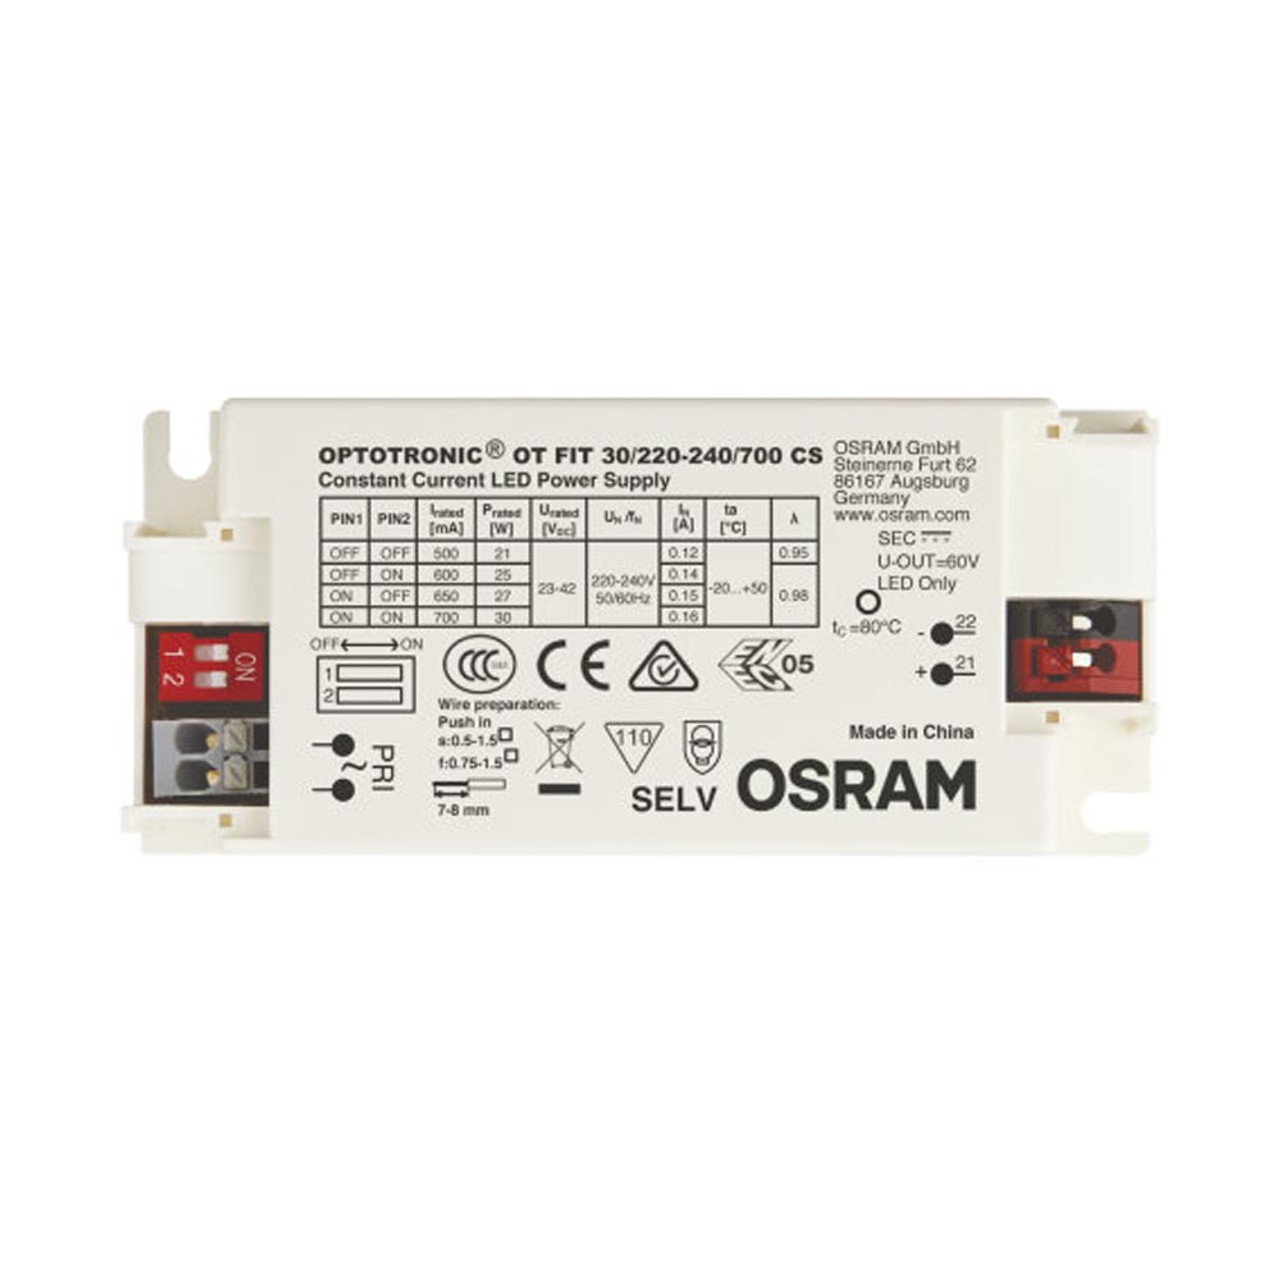 Optotronic 30W 700mA Constant Current LED Driver Osram